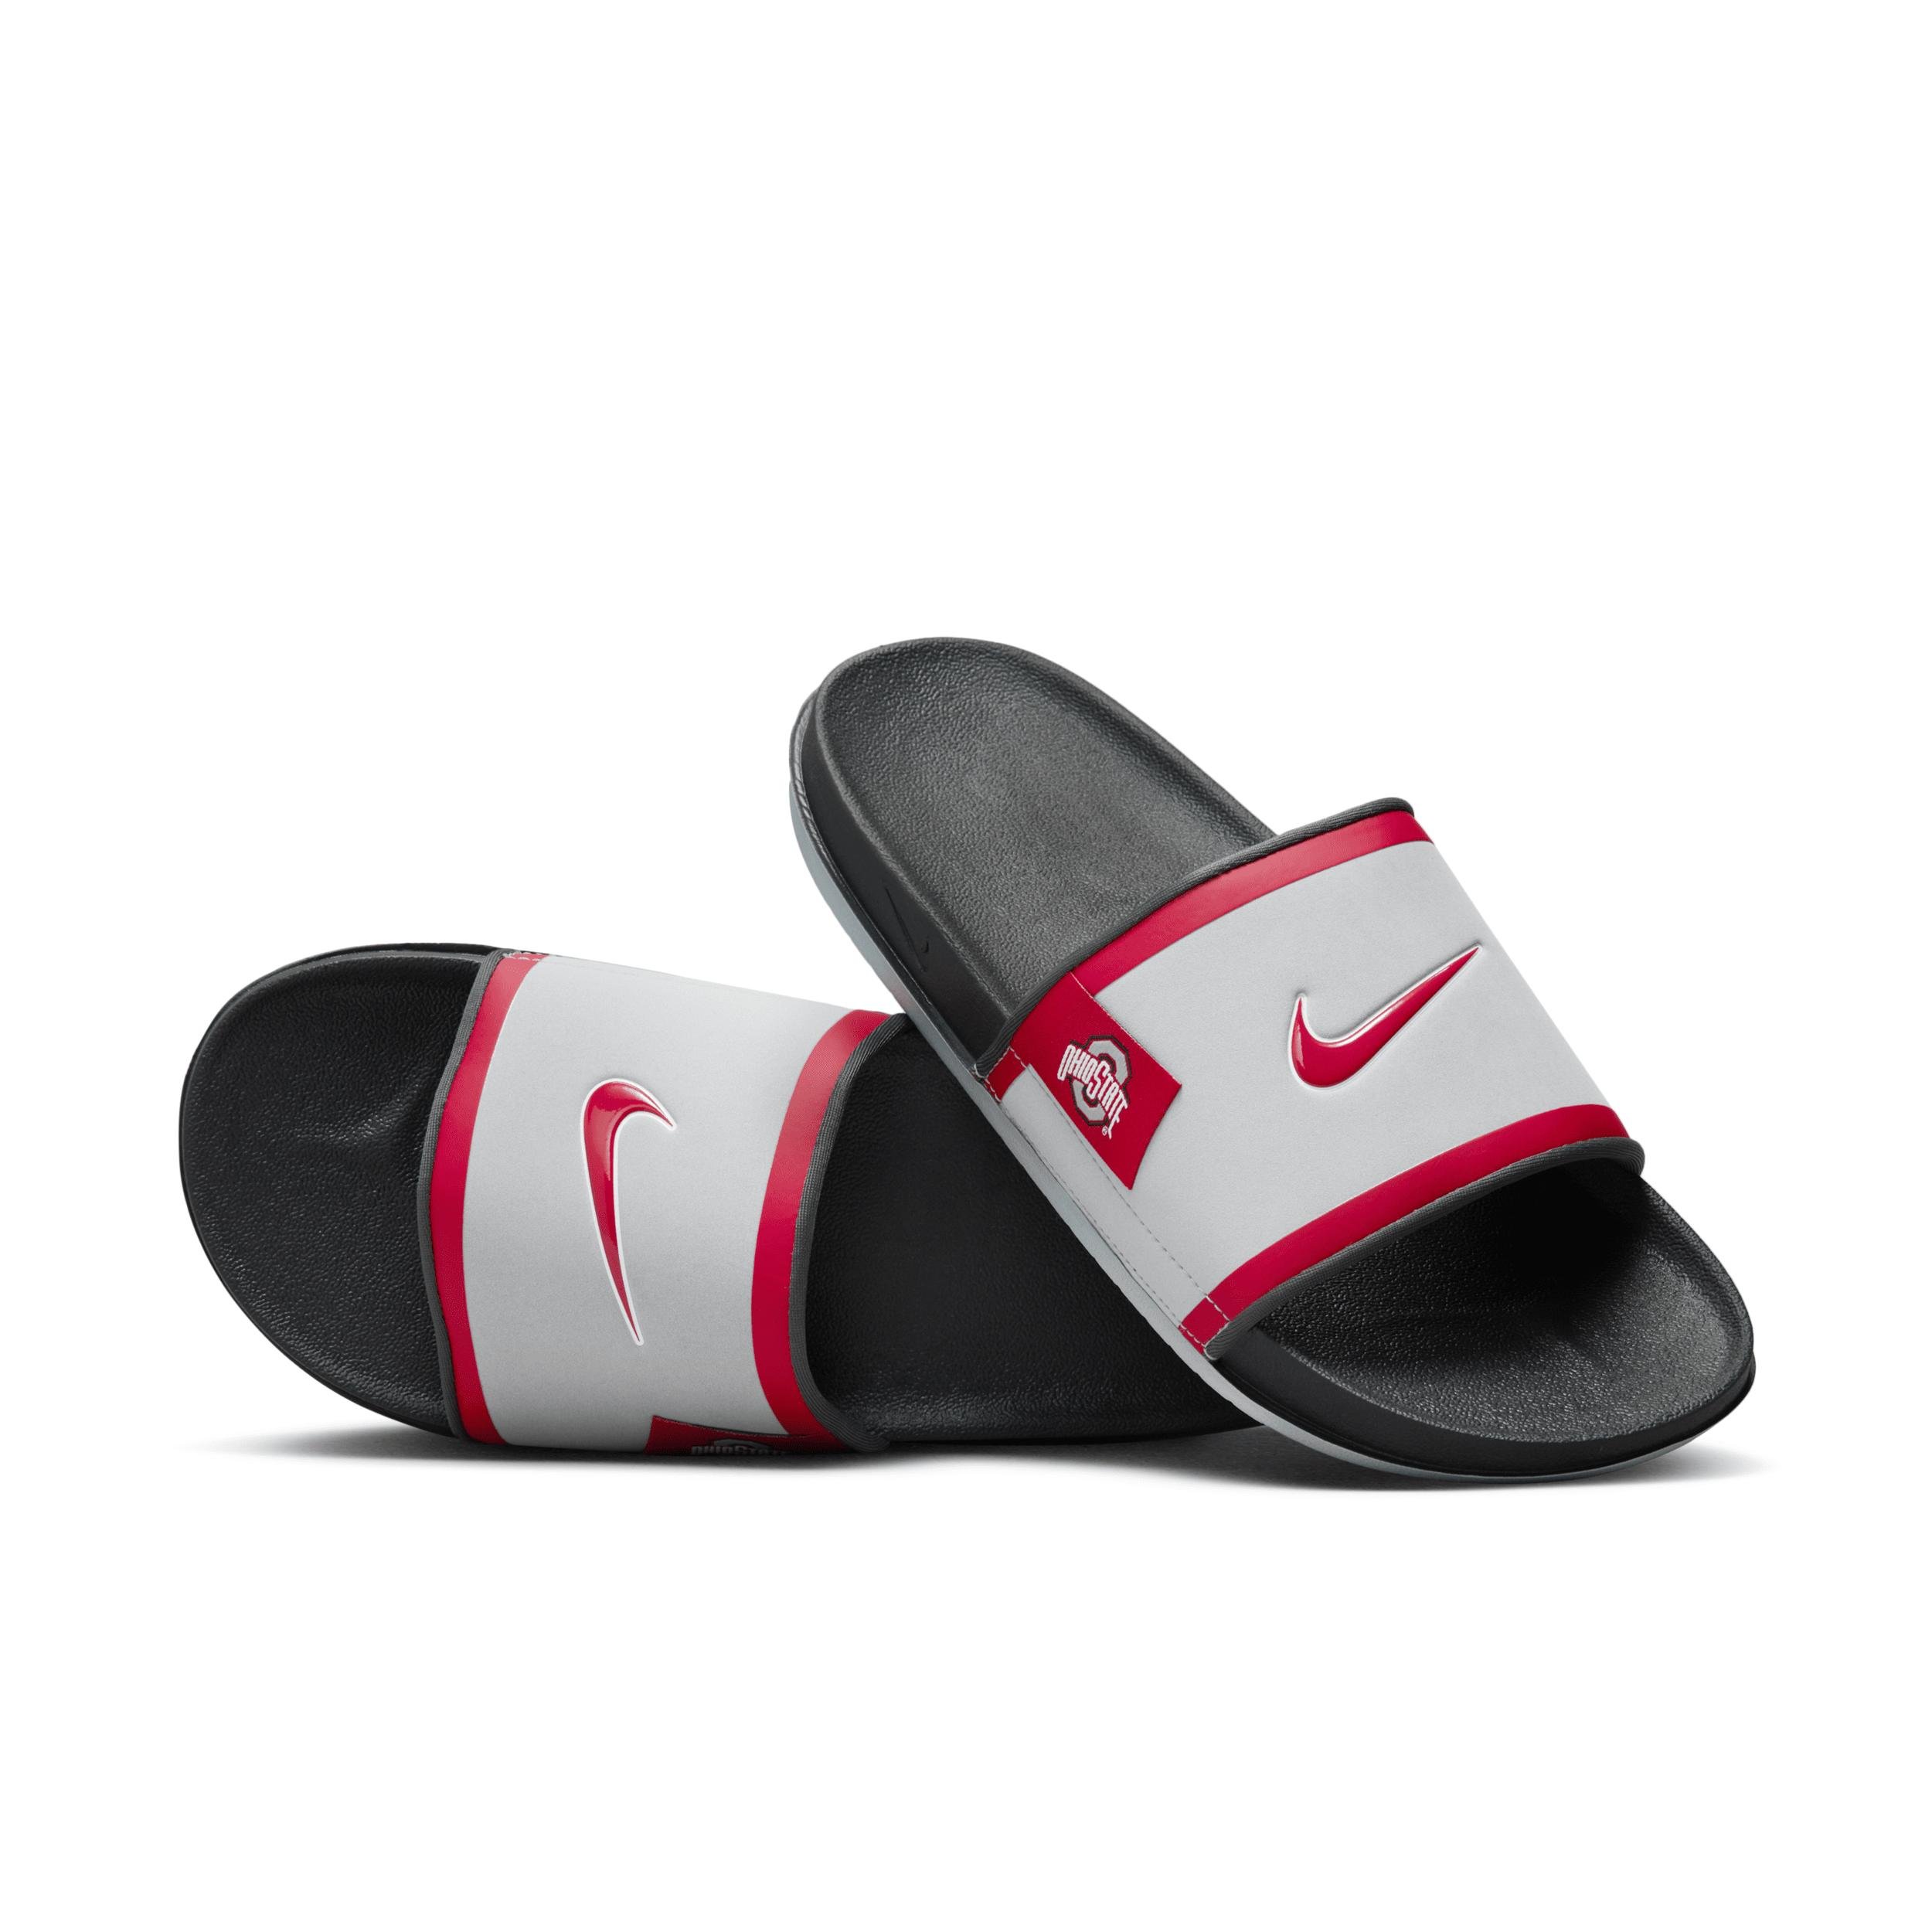 Nike Men's College Offcourt (Ohio State) Slides by NIKE